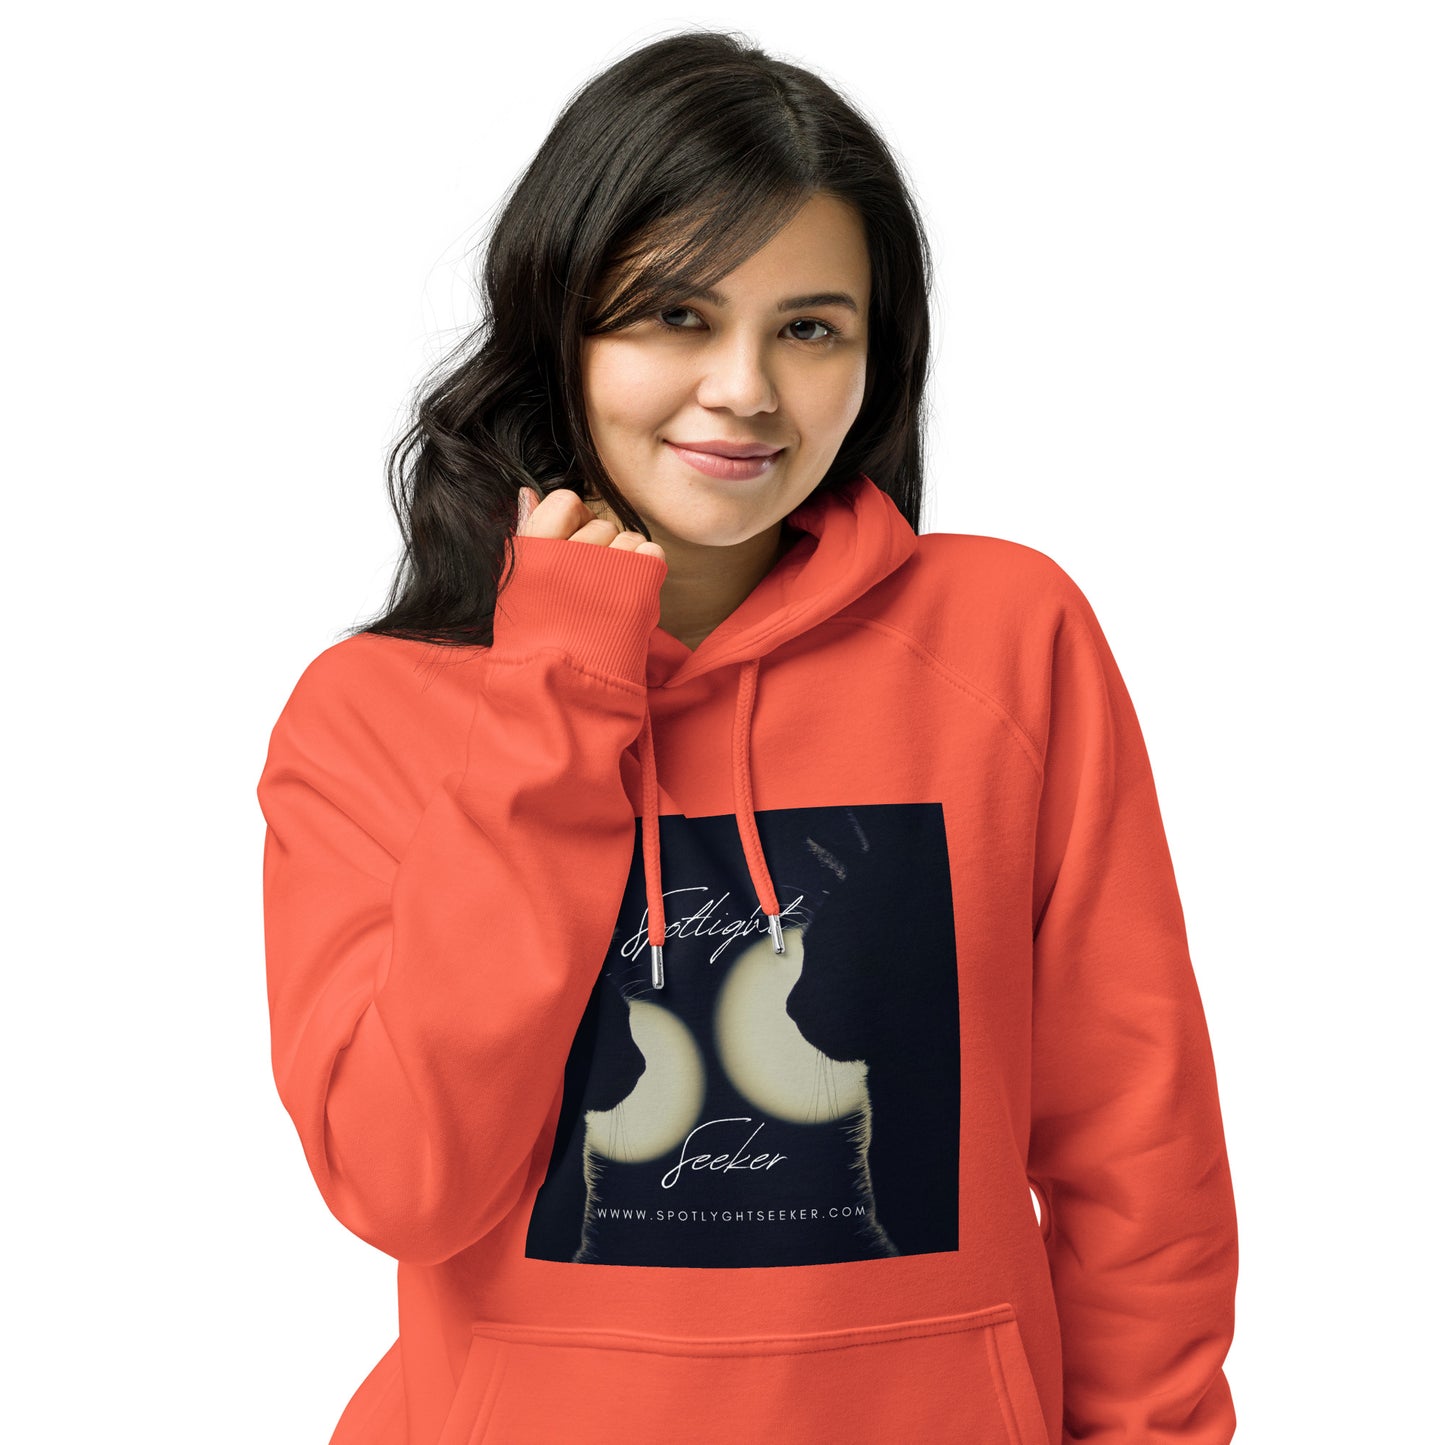 Image of the Cat Call Unisex Fitted Eco Hoodie - 'Dos Gotos Dos Gatos' design, a comfortable and stylish hoodie symbolizing artistic spotlight birthright, featuring an artistic portrayal of two cats. Crafted from eco-friendly materials. 🐱🎨